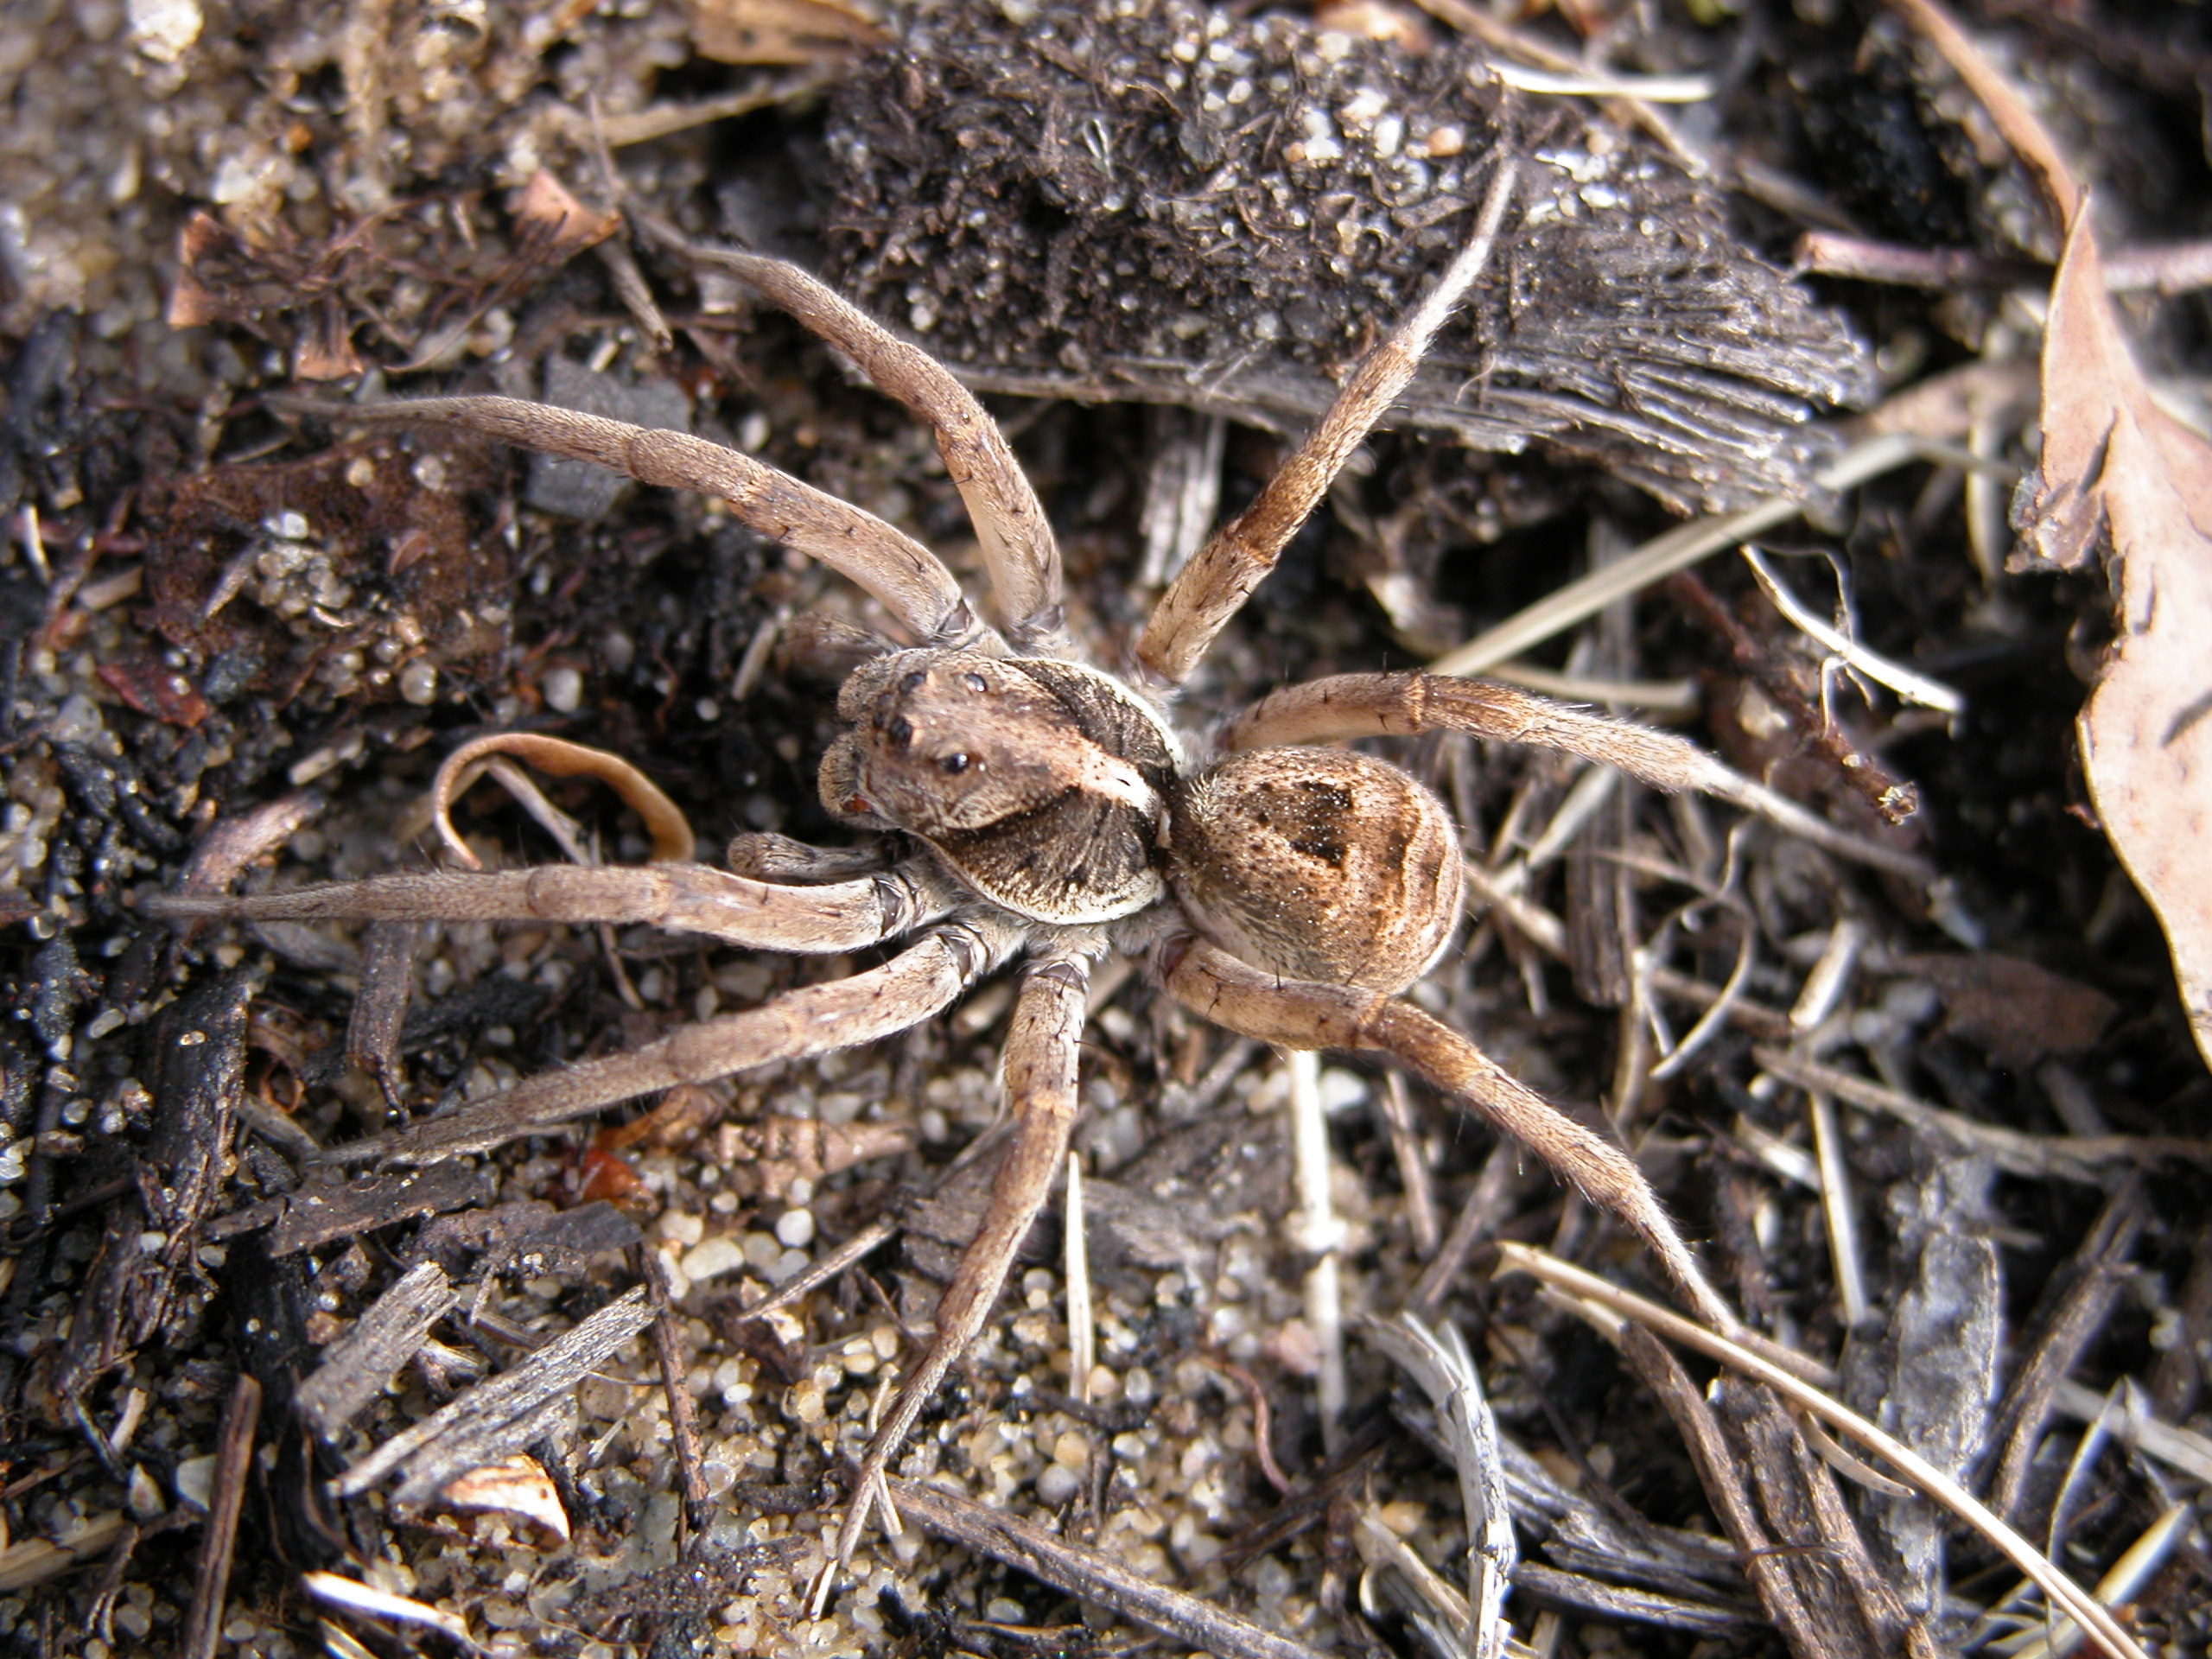 Common neighbourhood spiders | Agriculture